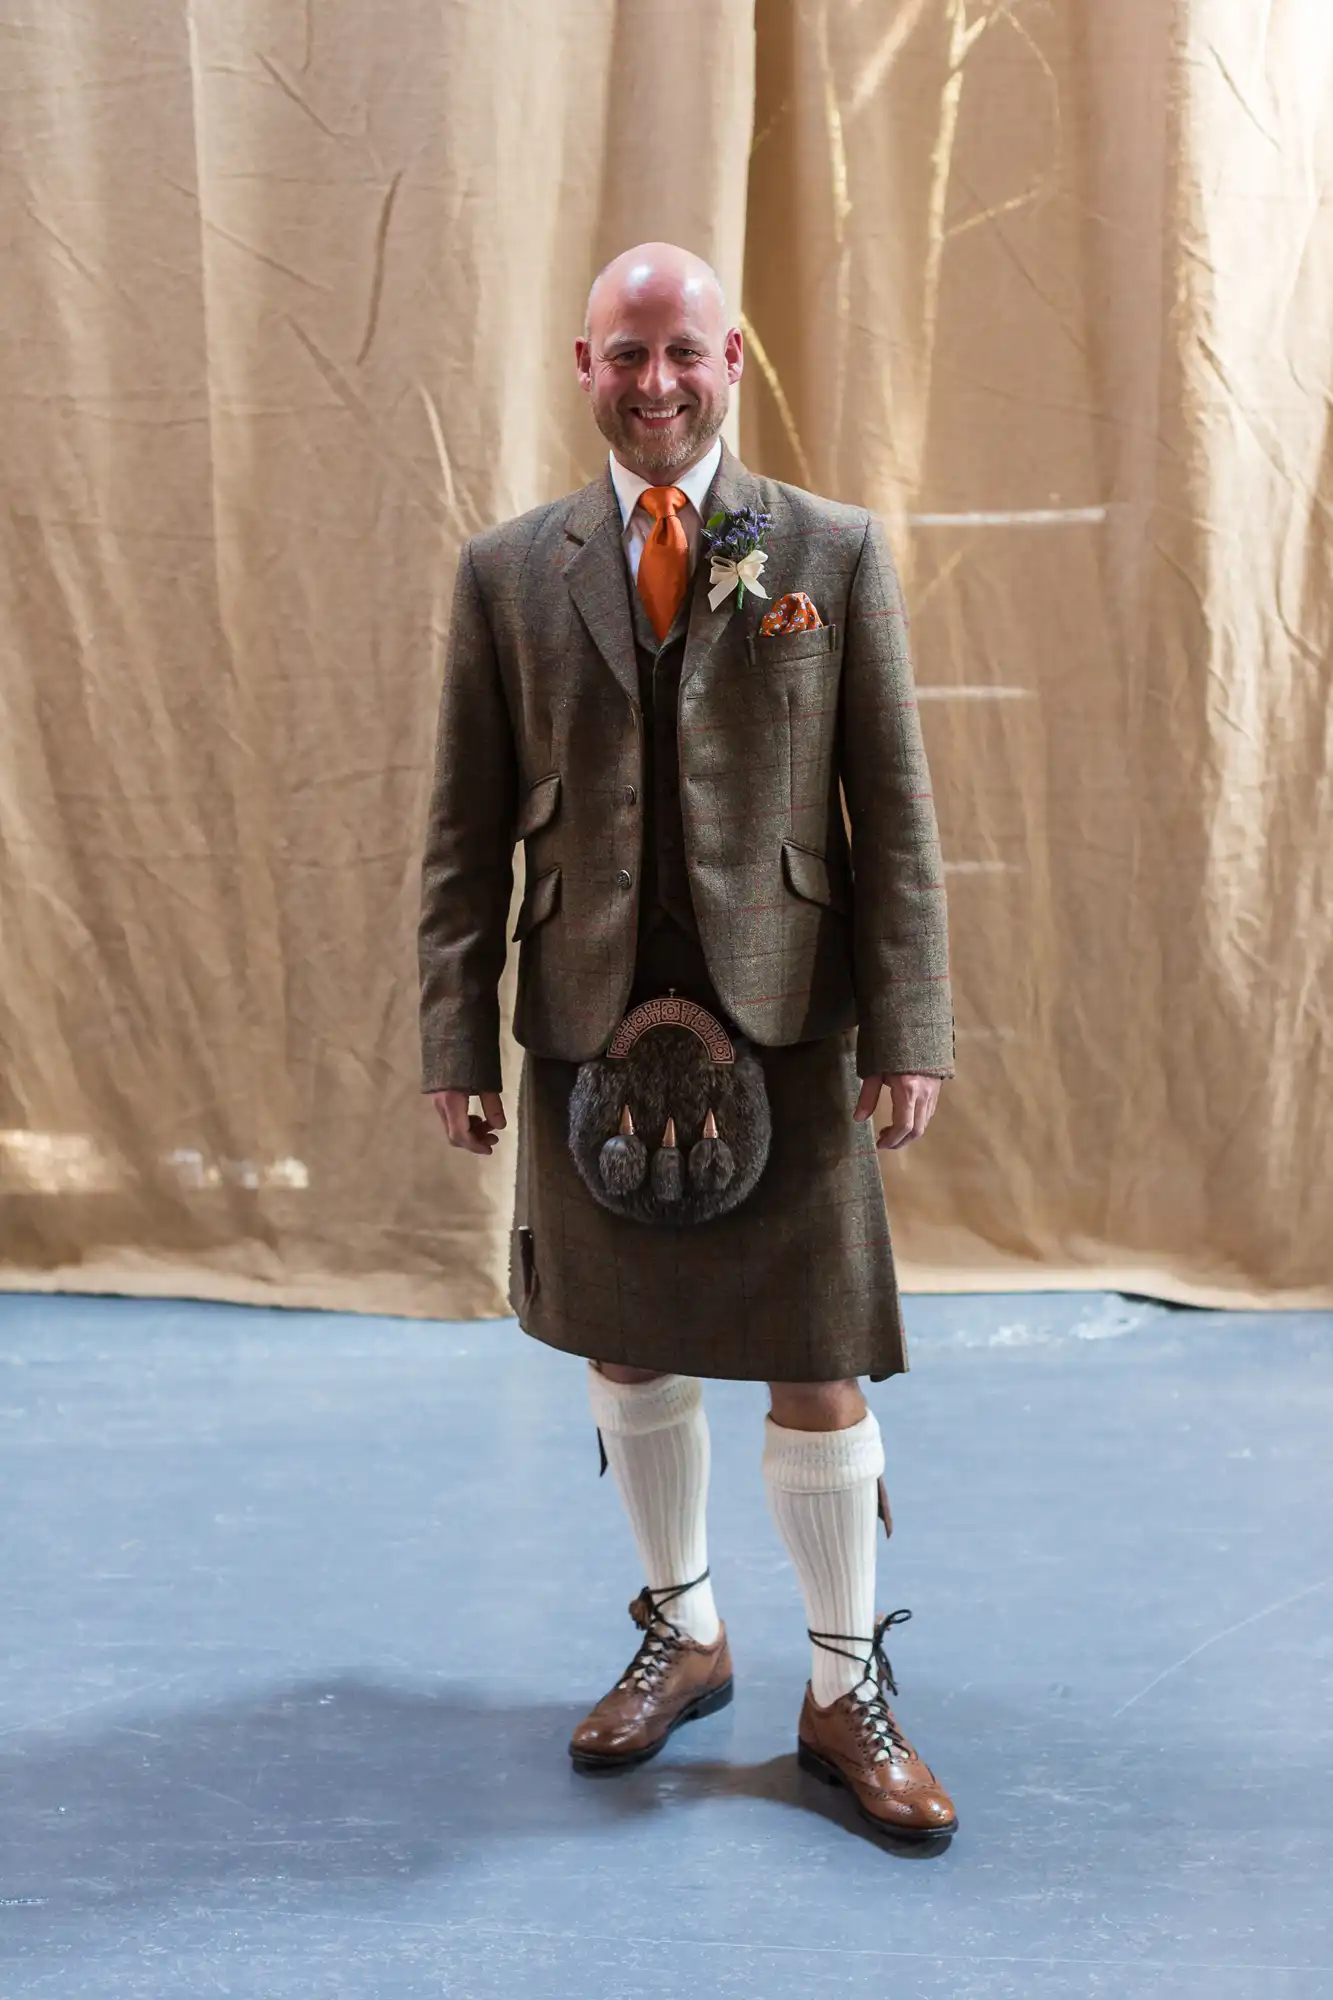 A smiling bald man wearing a traditional scottish outfit with a tweed jacket, kilt, sporran, knee-high socks, and brown shoes, standing against a beige backdrop.